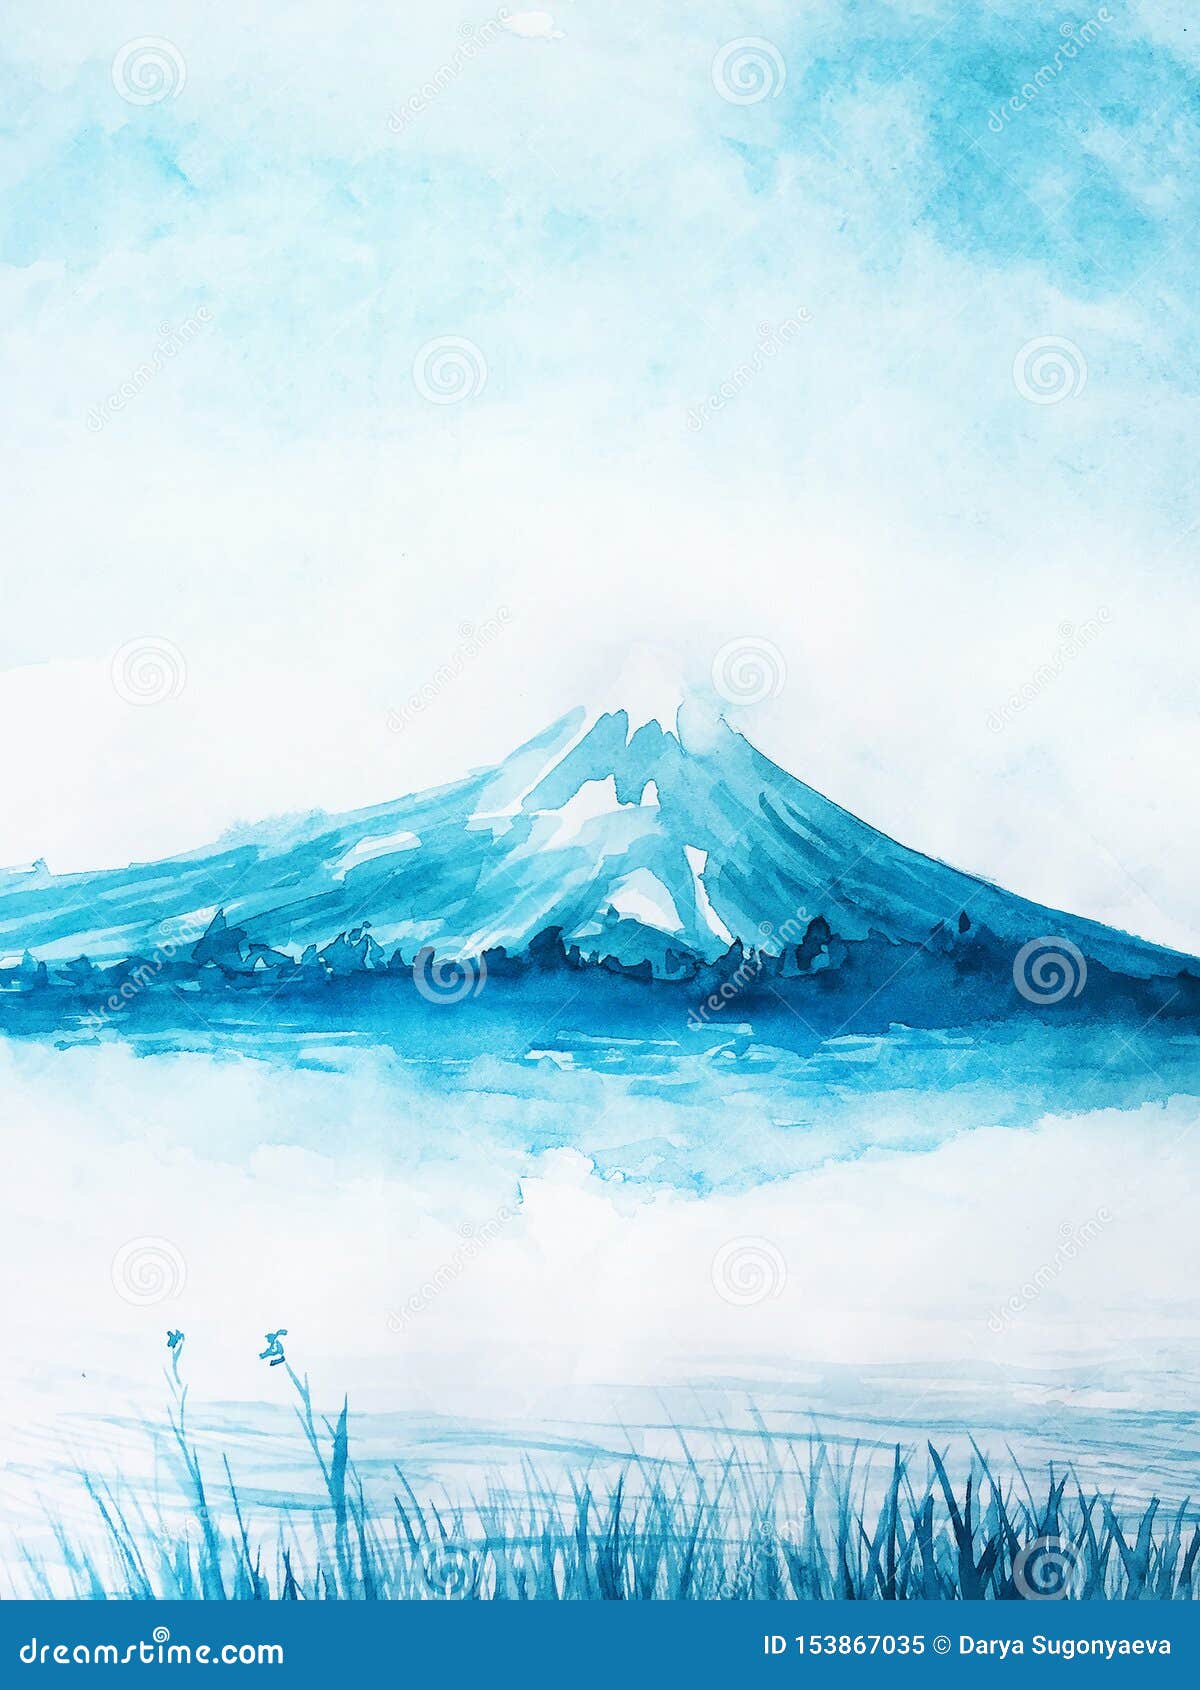 mountain fuji and lake in blue colors watercolor illlustration